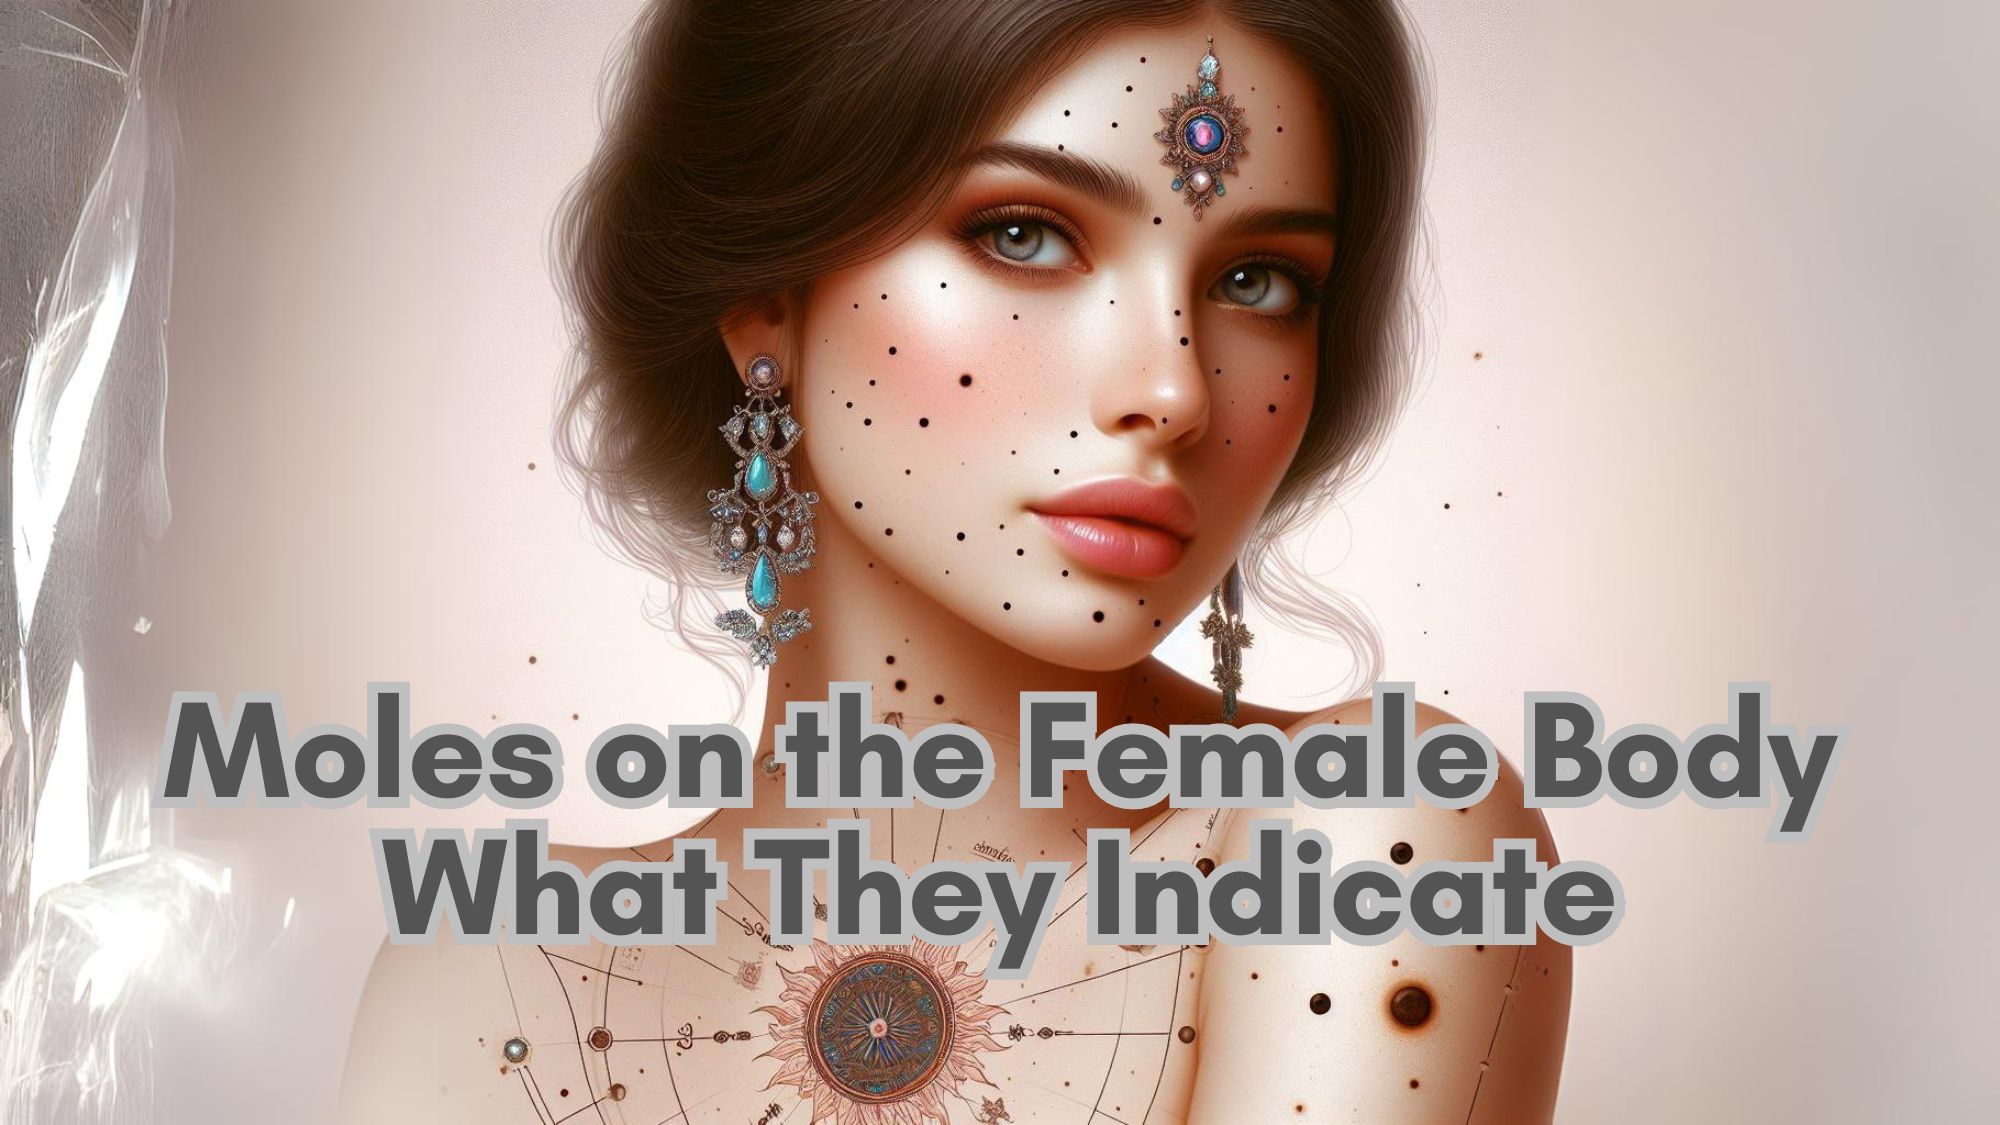 moles-on-the-female-body-what-they-indicate